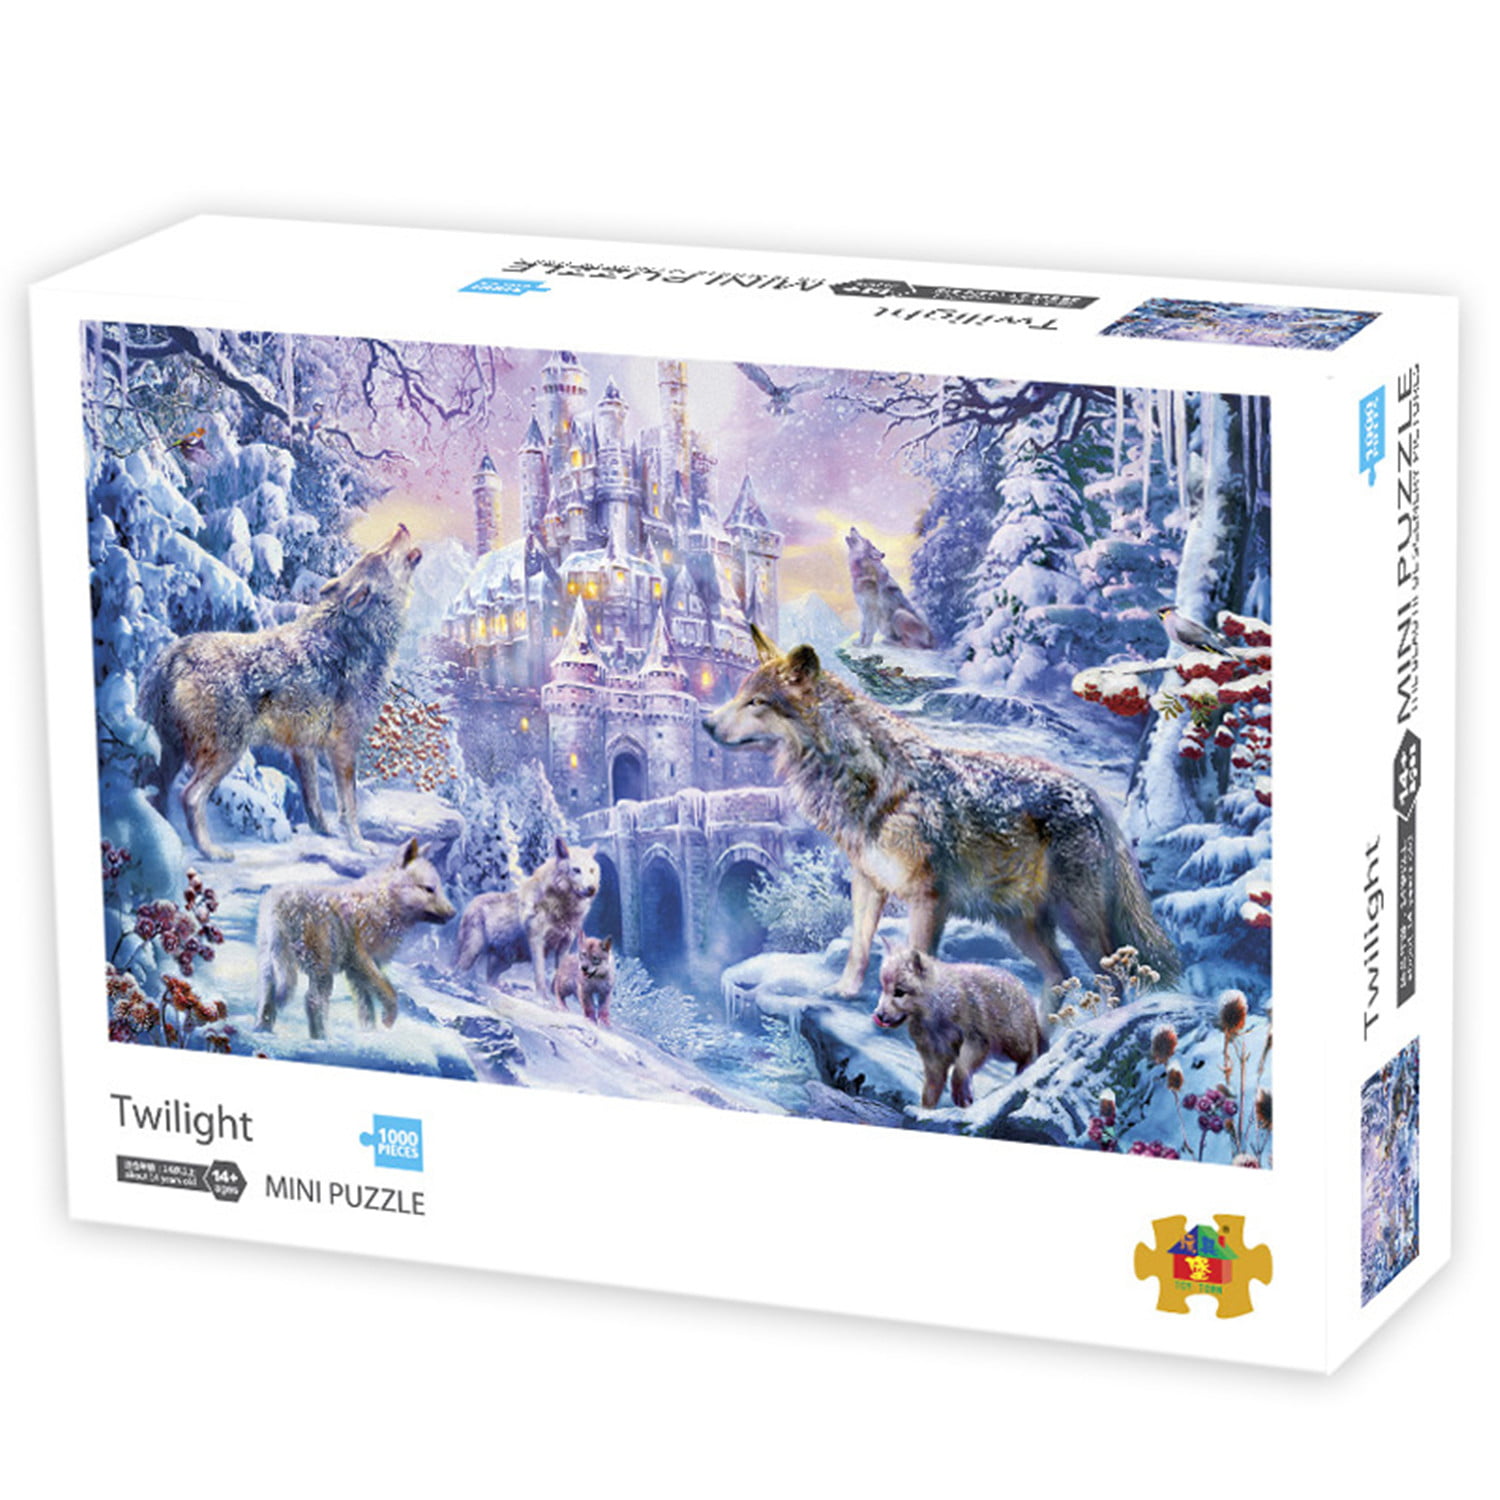 New Hot Snow Scene Educational 1000 Piece Jigsaw Puzzles Adult Kid Puzzle Toy 